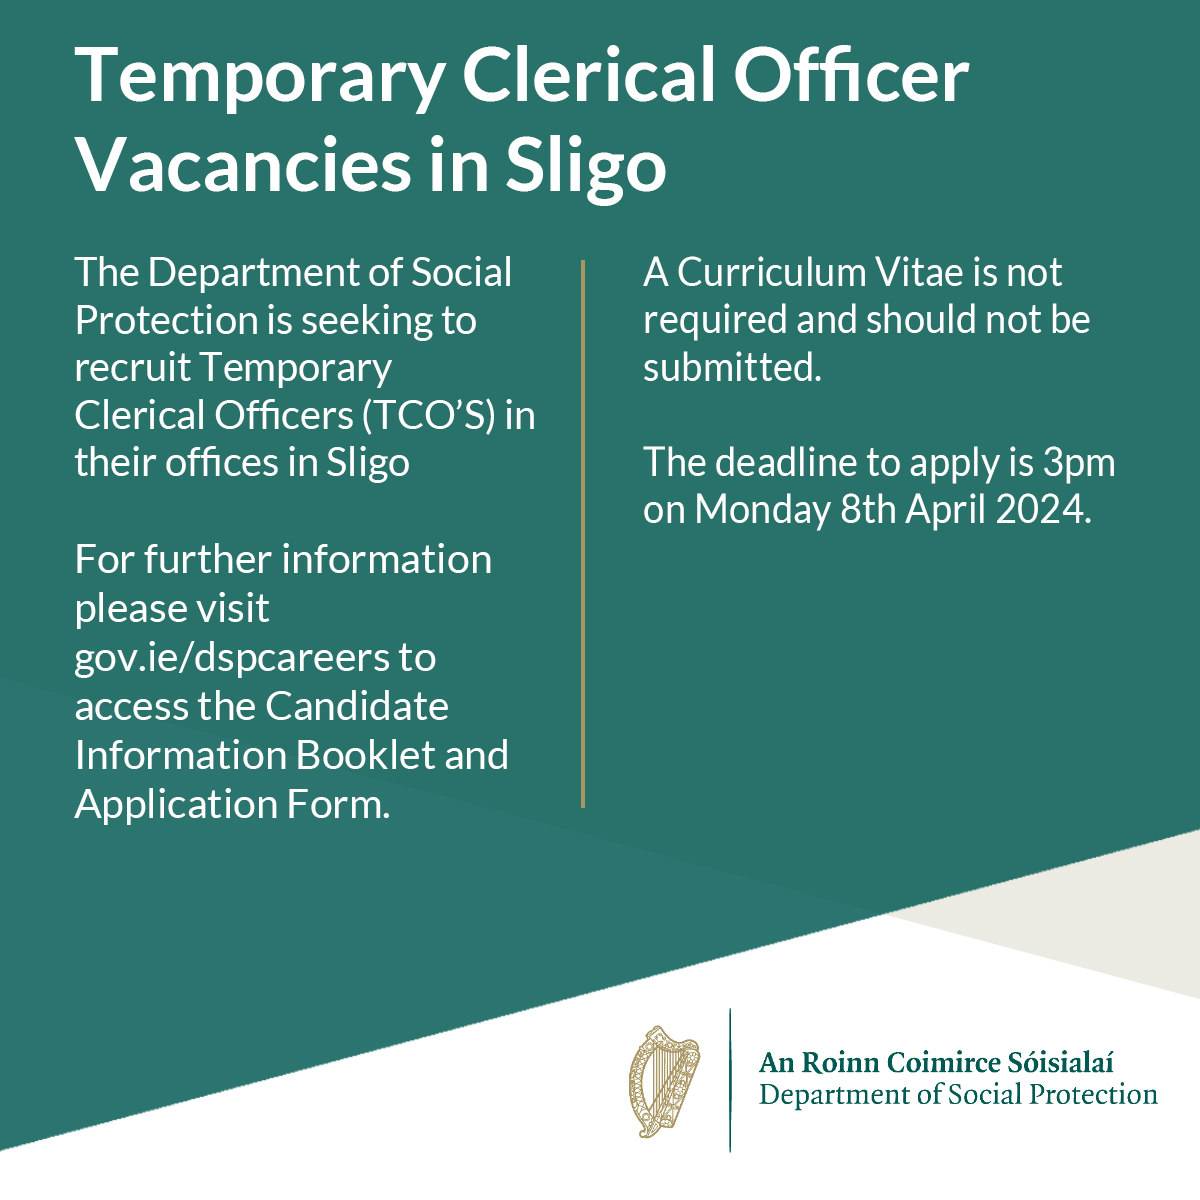 📢Temporary Clerical Officer (TCO) positions based in Sligo @ The Department of Social Protection. ℹ️ Please visit gov.ie/dspcareers to download the Candidate Information Booklet and access the link to apply for the positions.